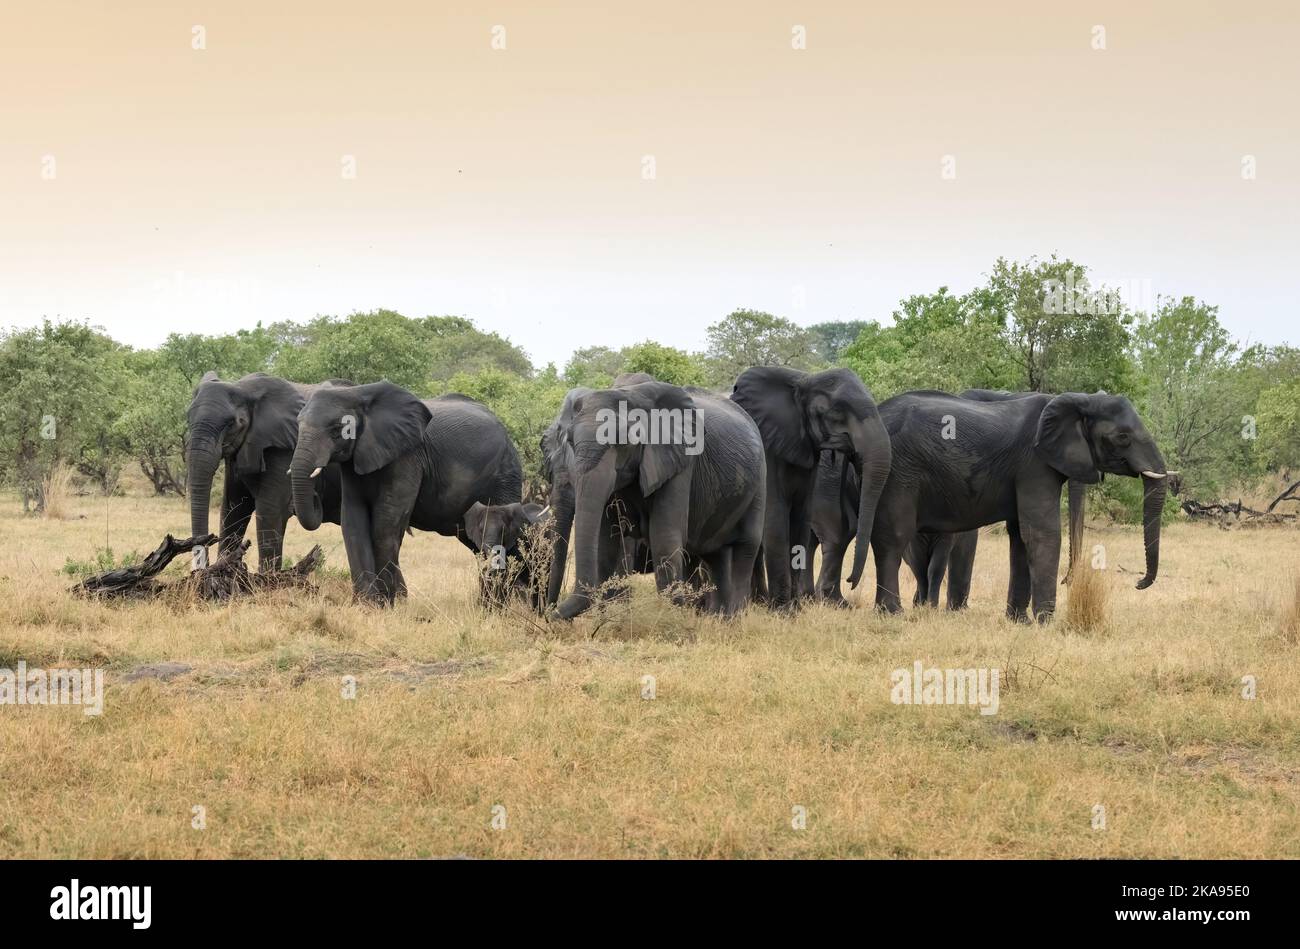 Animal behaviour, African elephant herd standing in a protective circle around baby elephants when threatened, Moremi Game Reserve, Botswana Africa Stock Photo